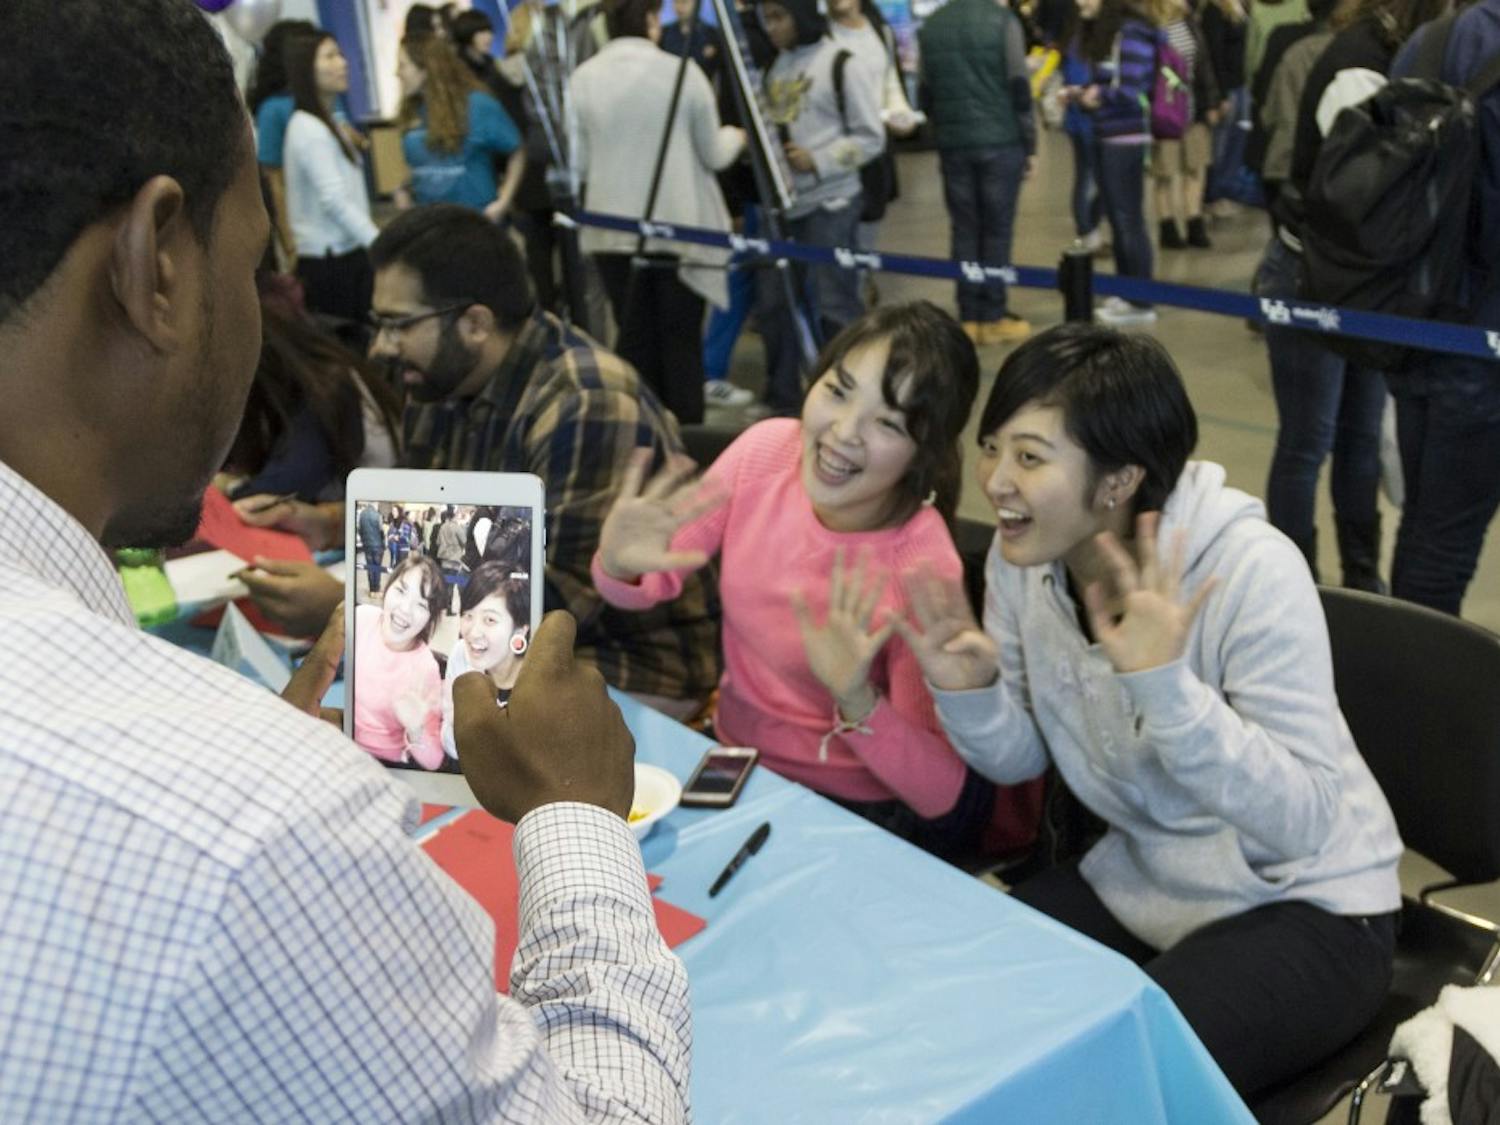 International Education Week provides students a&nbsp;variety of activities in the Student Union.&nbsp;